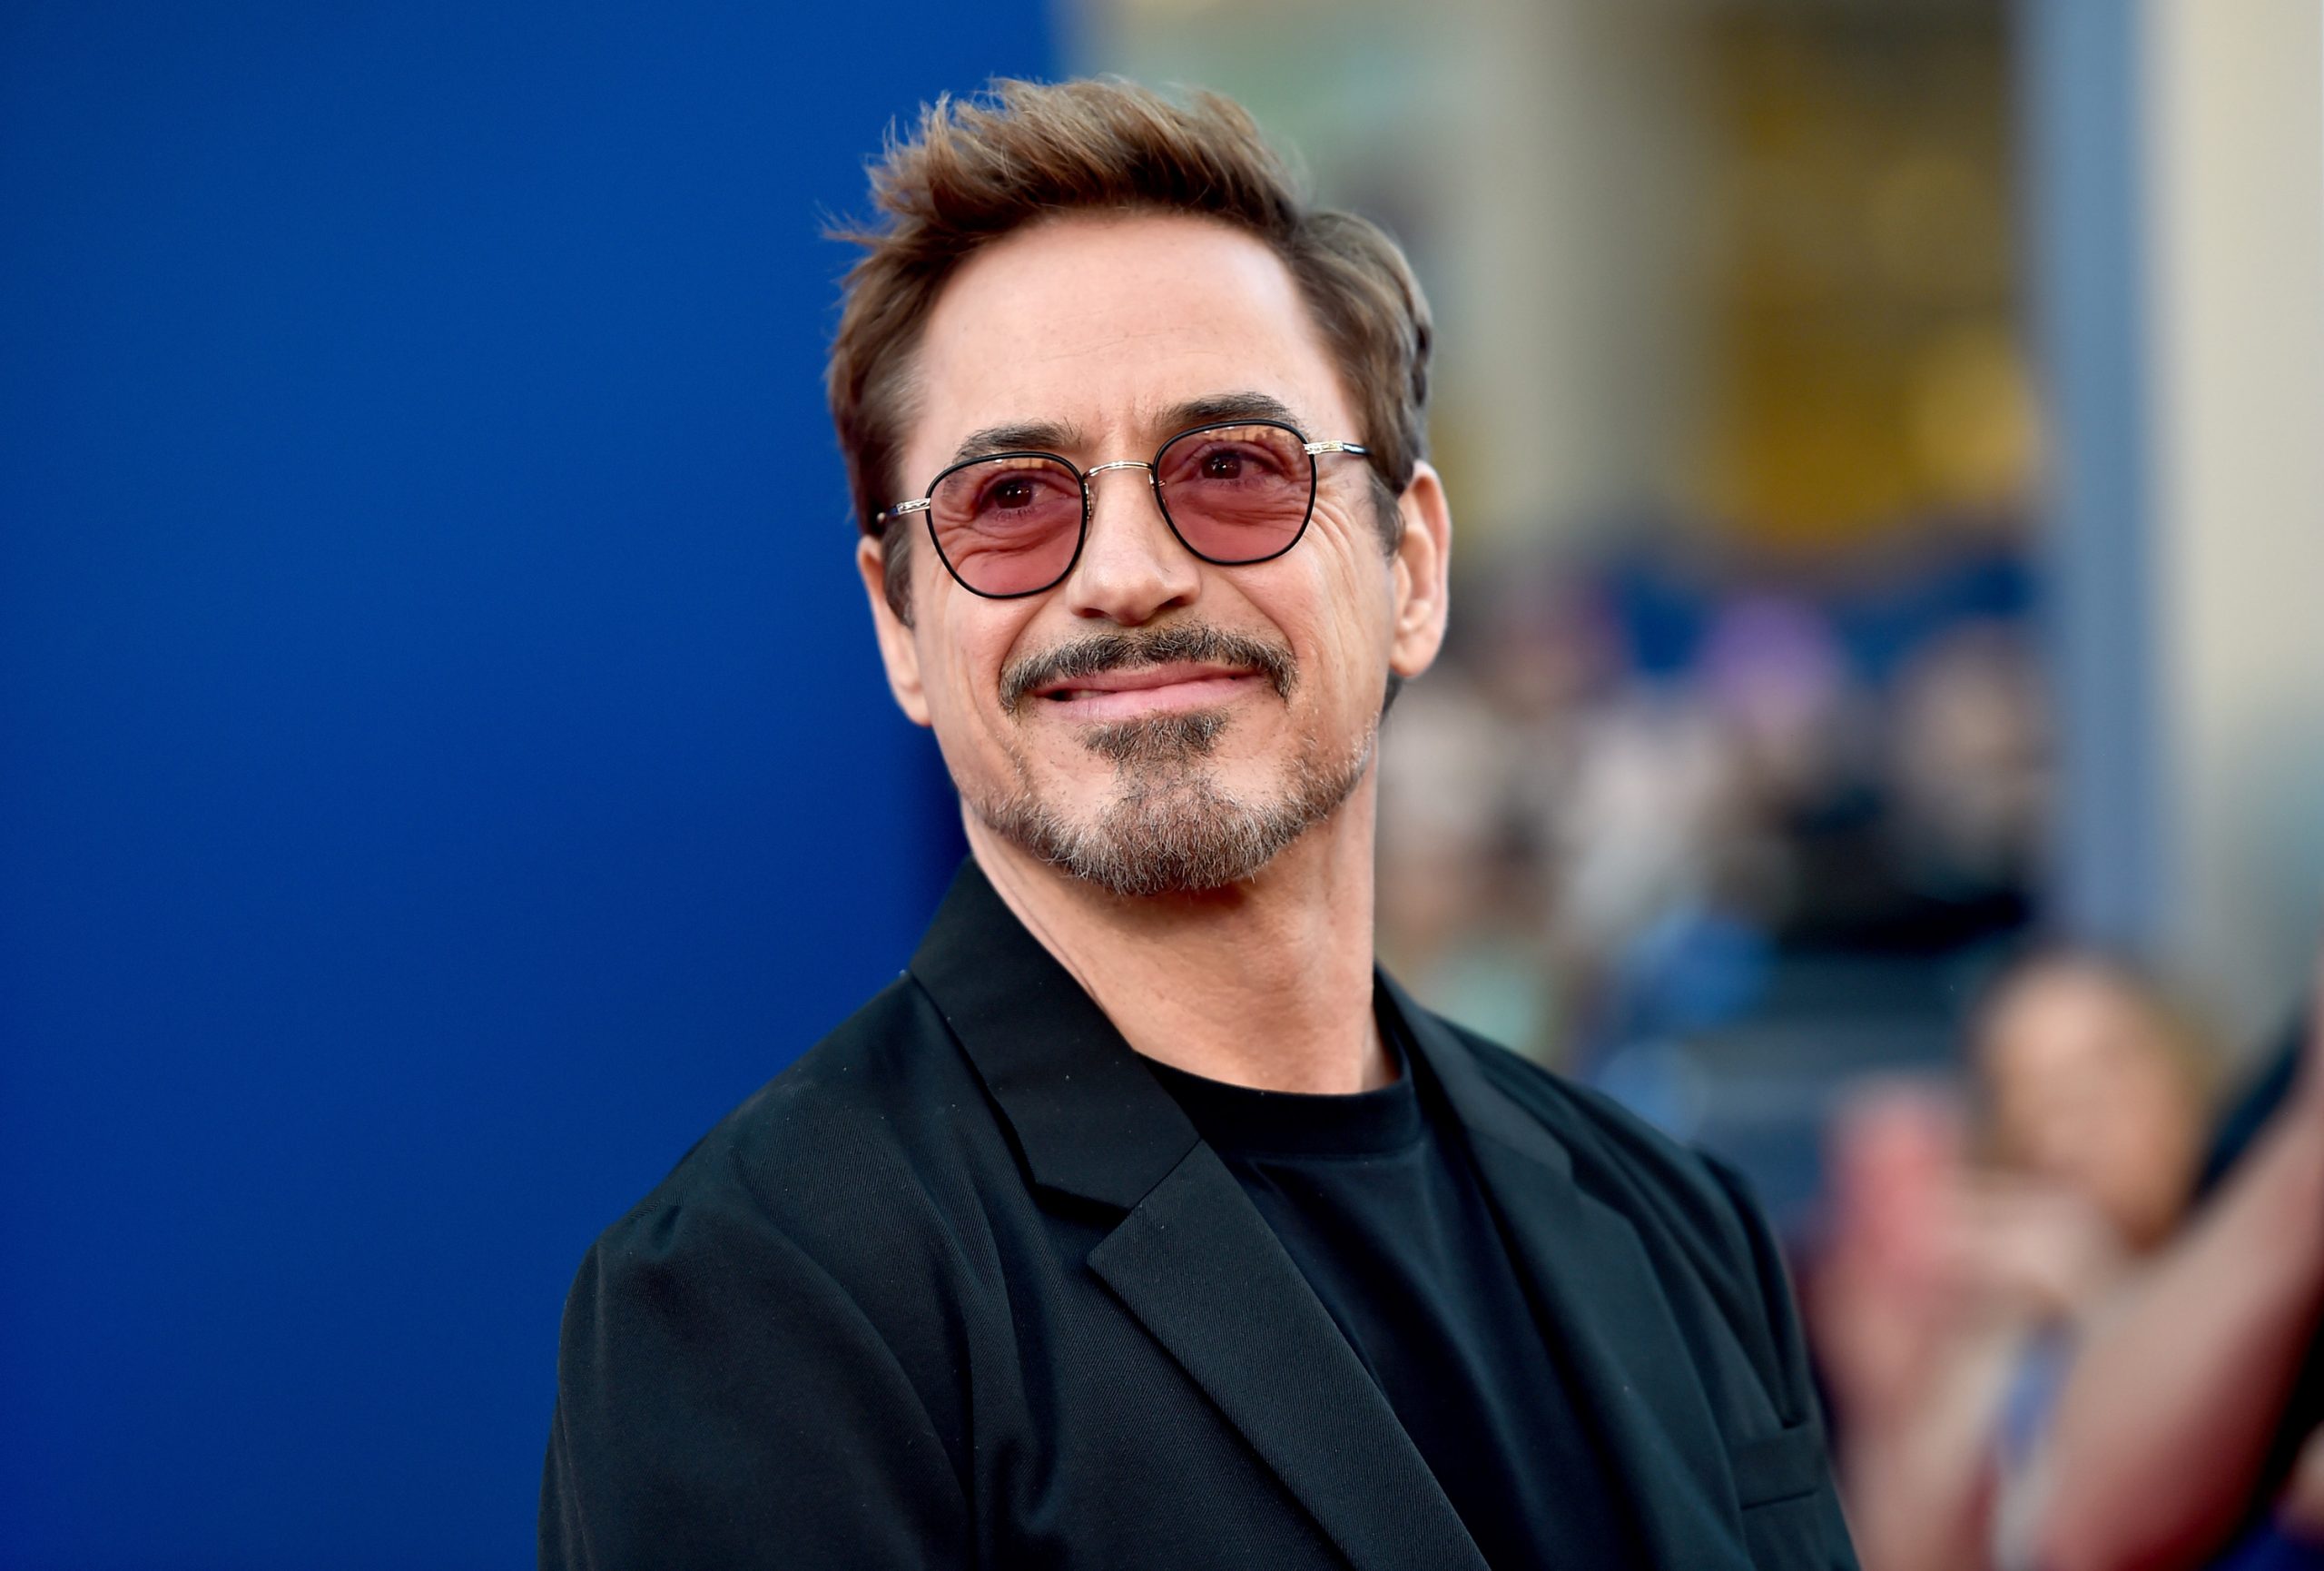 American actor and producer, Robert Downey Jr. as Tony Stark in the MCU.